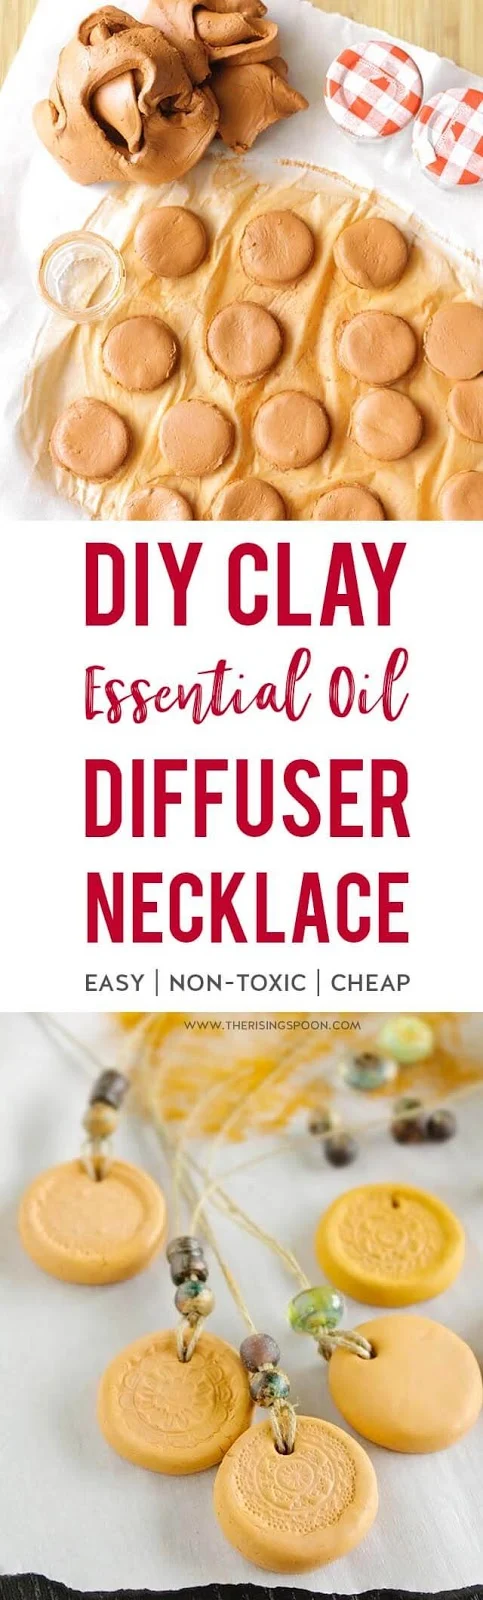 Essential Oil Diffuser (clay) to place - order now